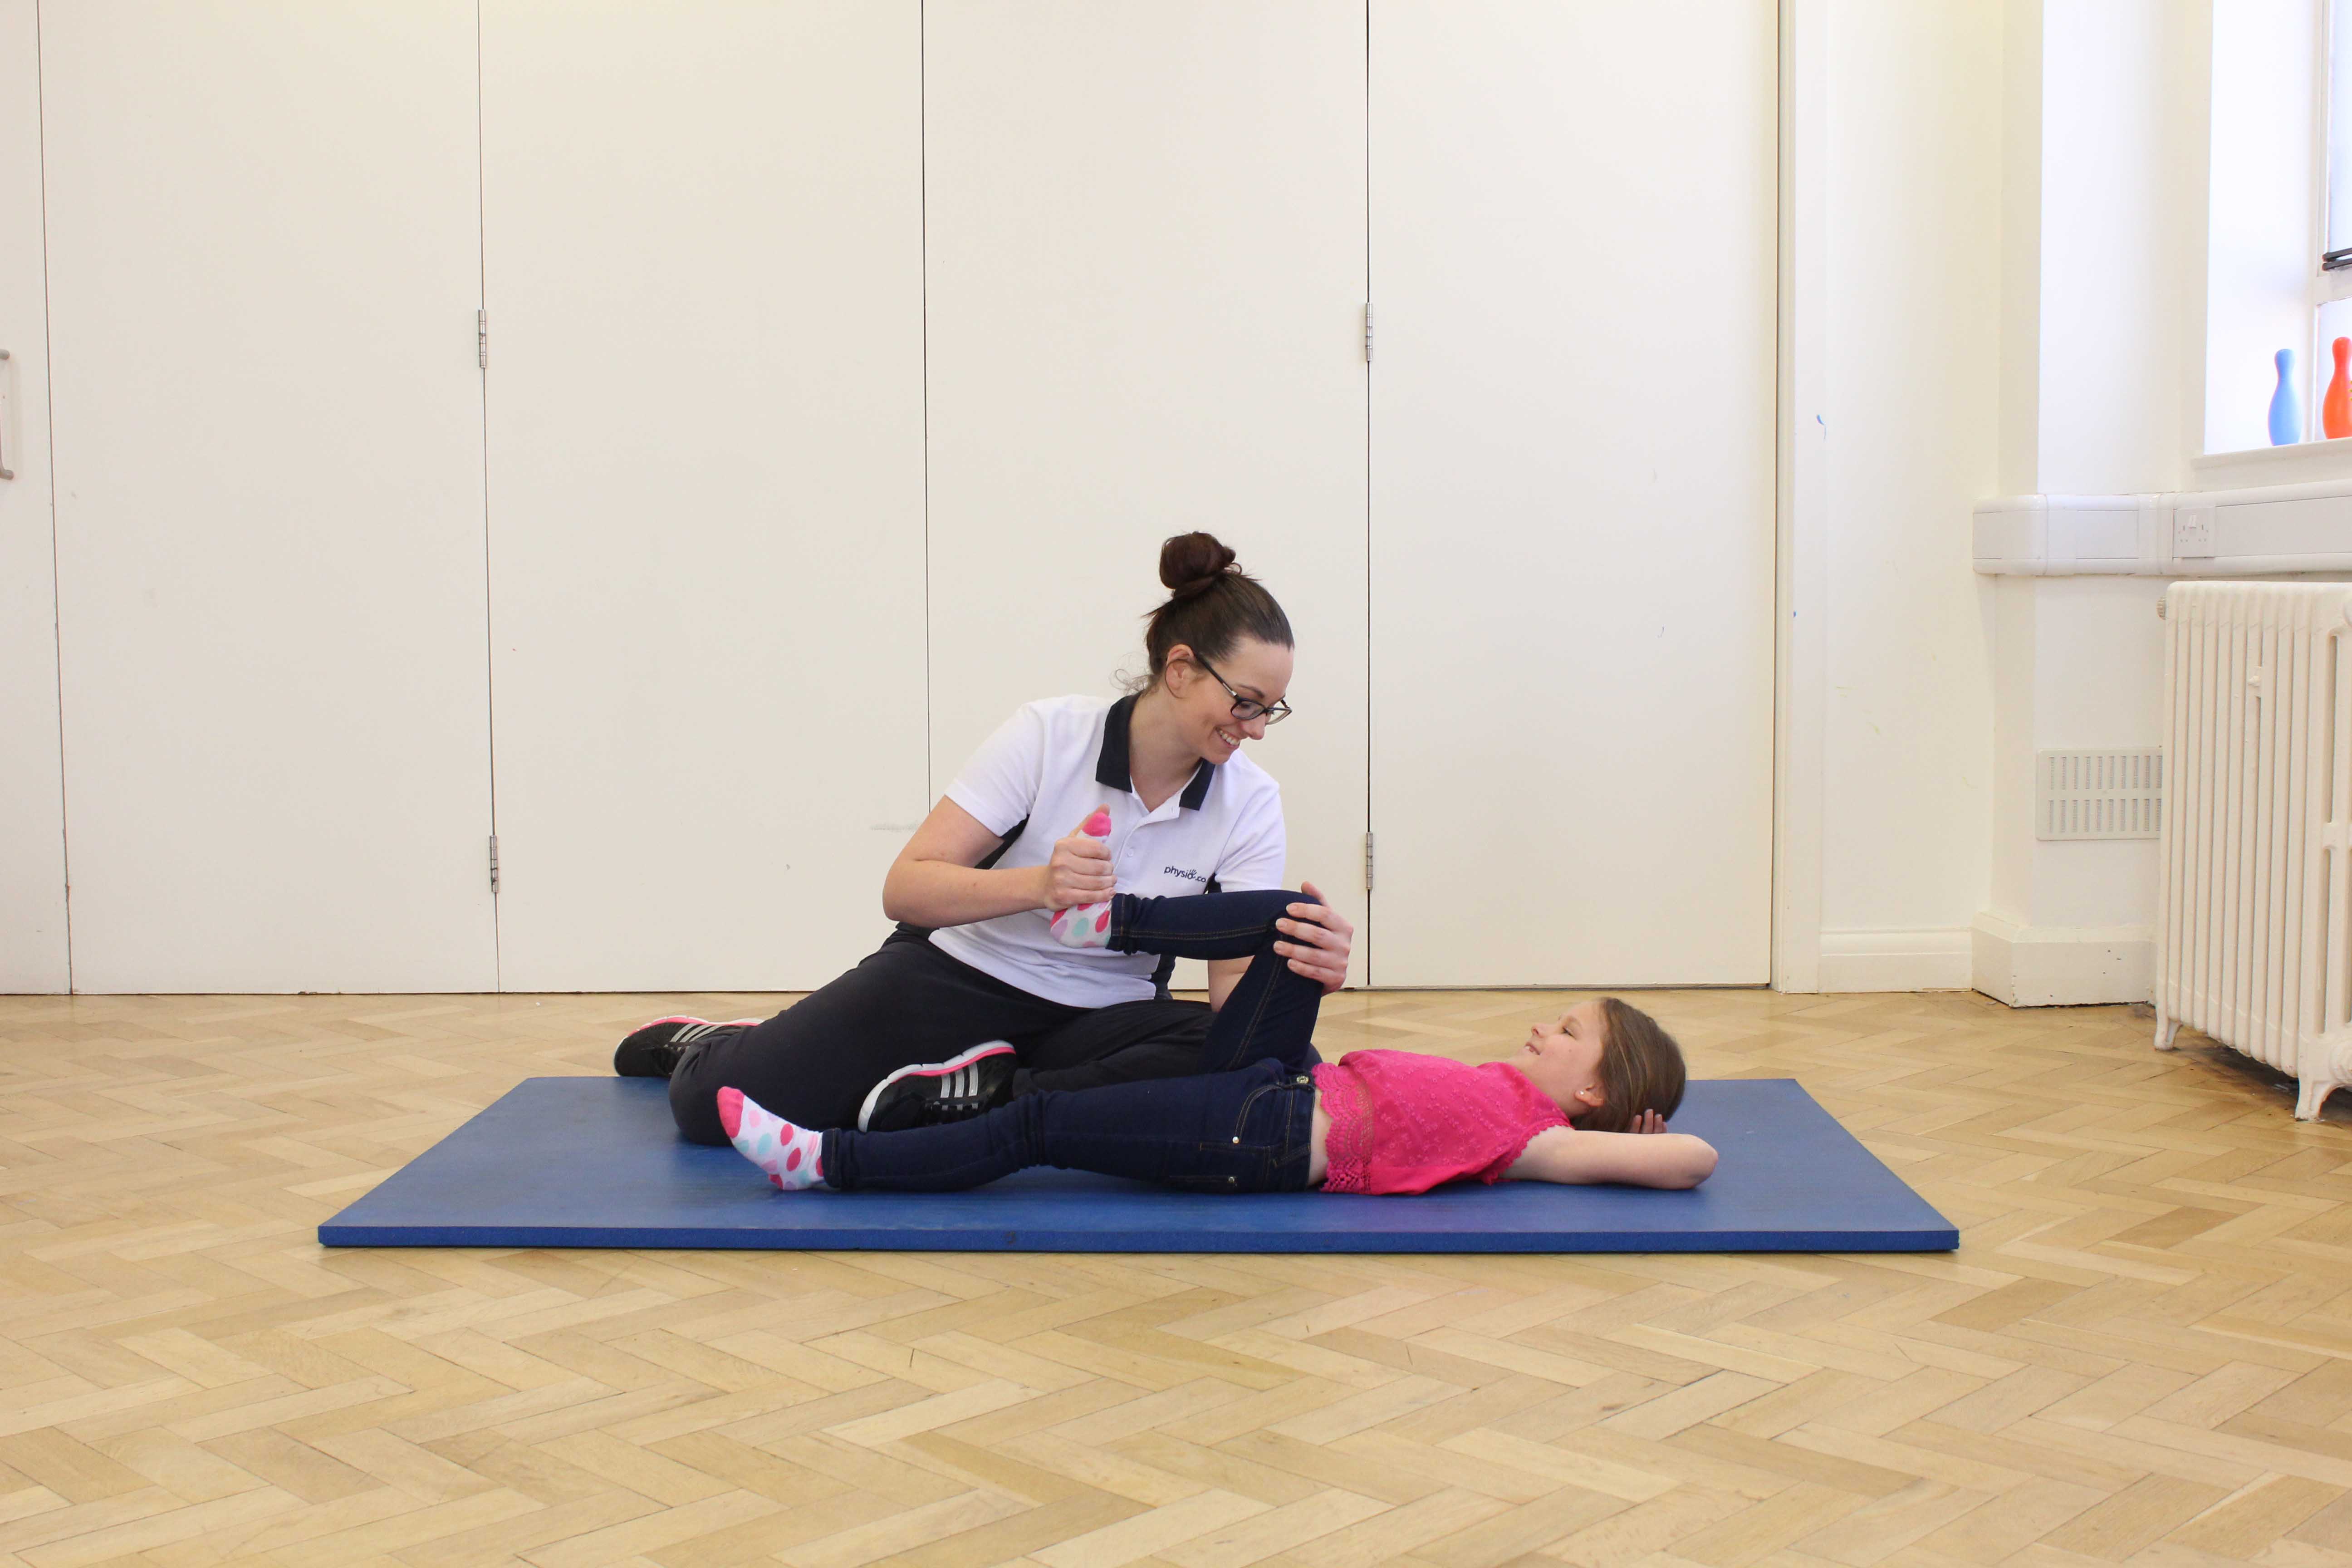 Upper limb mobility and co-ordination exercises assisted by a paediatric physiotherapist